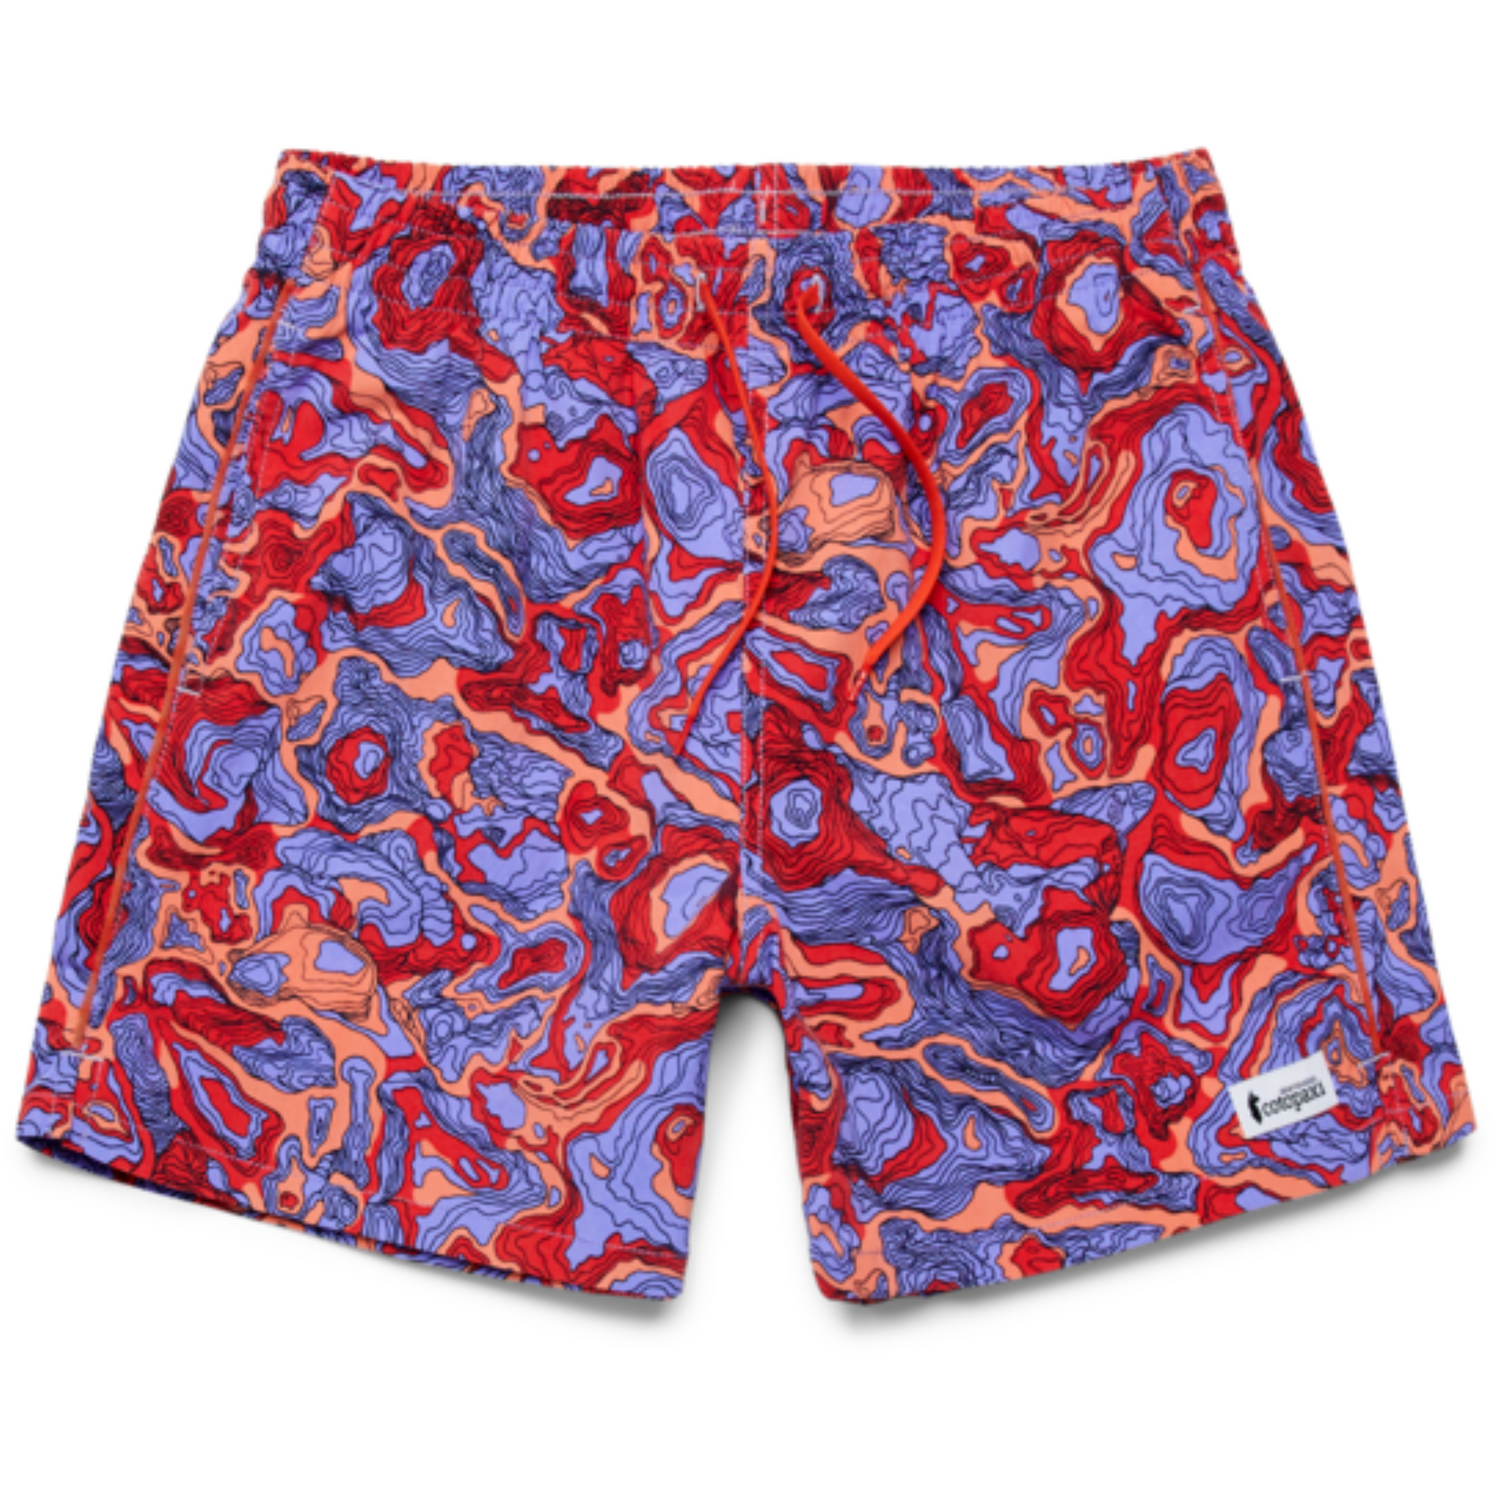 Cotopaxi Flat Lay Men's Brinco Shorts in Pattern